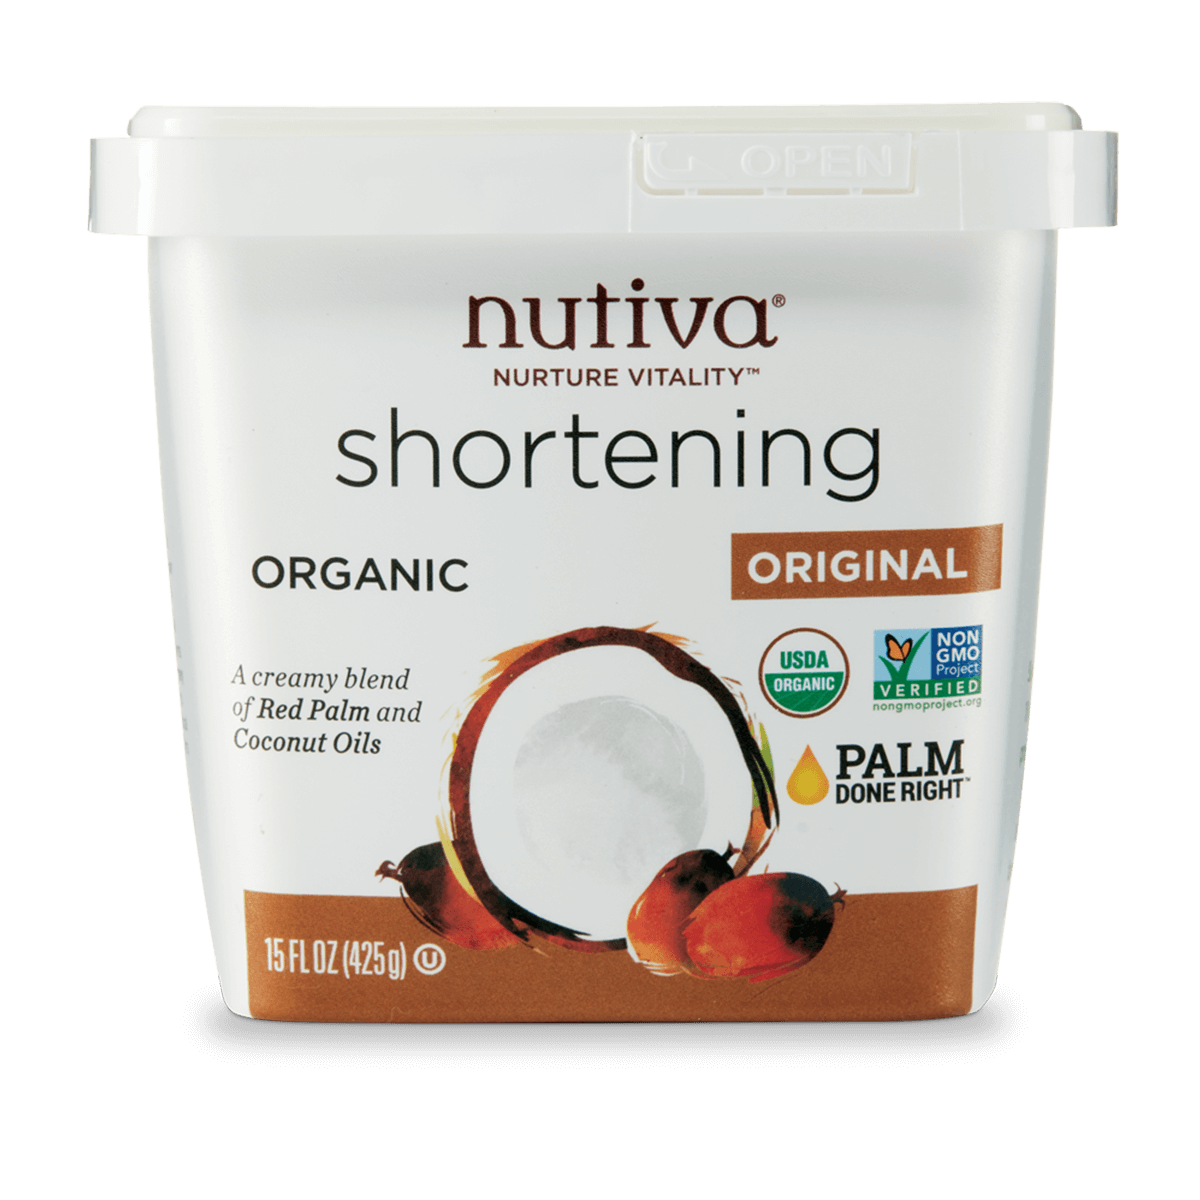 Has anyone ever used Nutiva palm shortening in their soap?